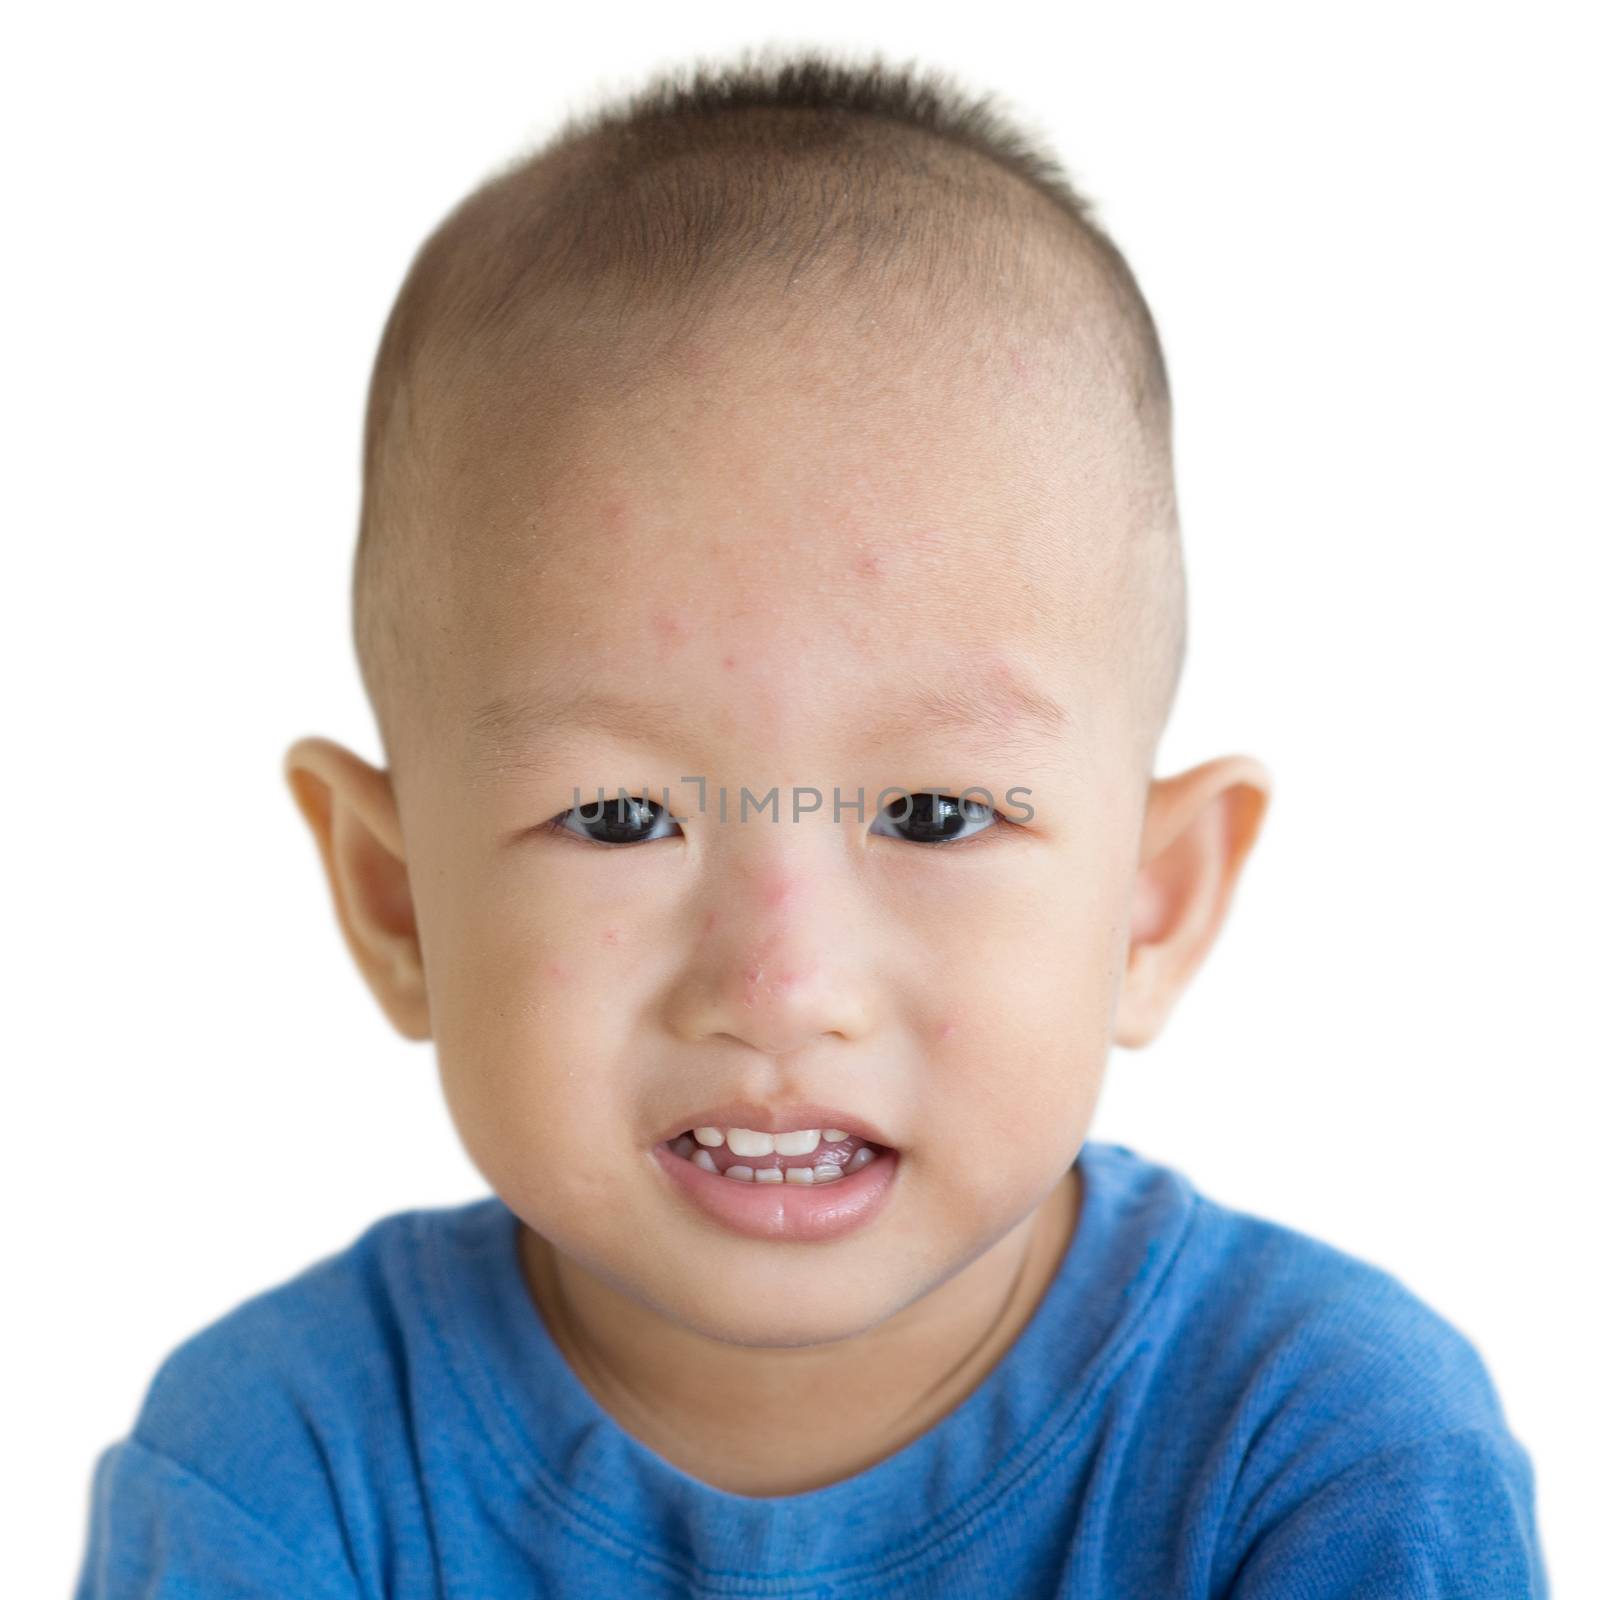 Two years old Asian toddler with red rashes on face. Portrait of young boy isolated on white background.